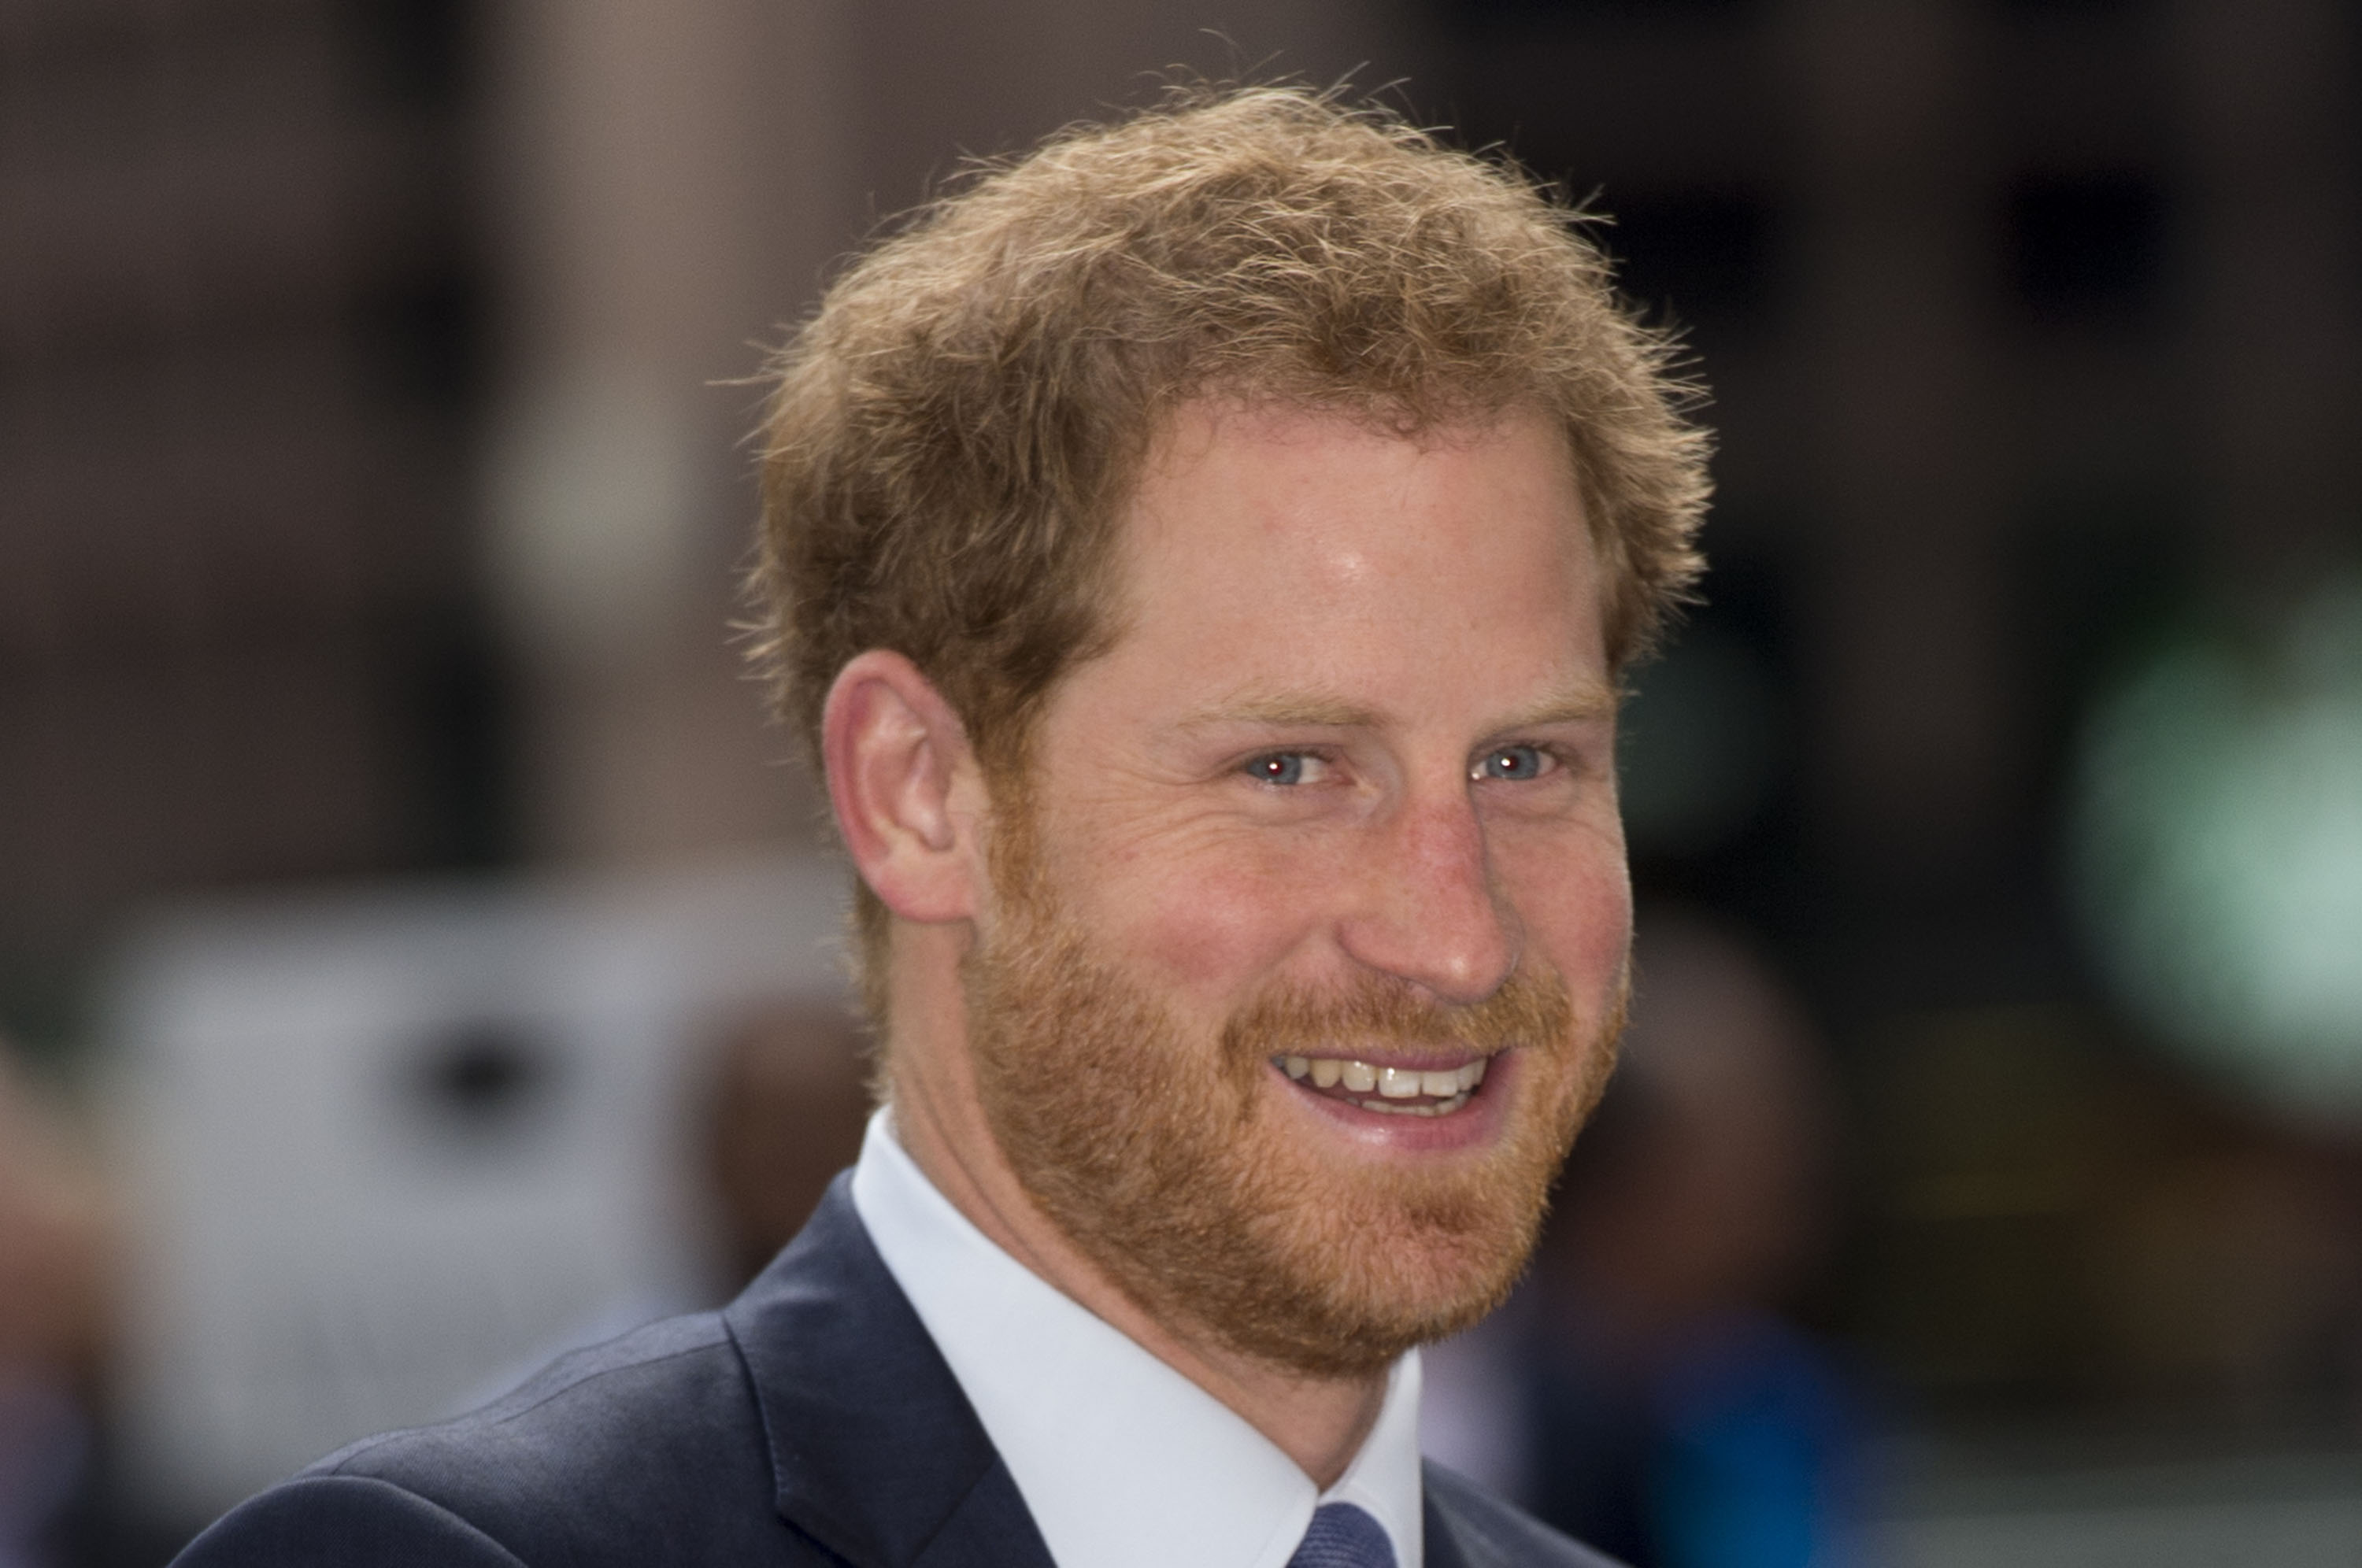 Prince Harry attends the ICAP's 24th annual charity trading day in aid of Sentebale at ICAP on December 7, 2016 in London, England. (Mark Cuthbert—Getty Images)